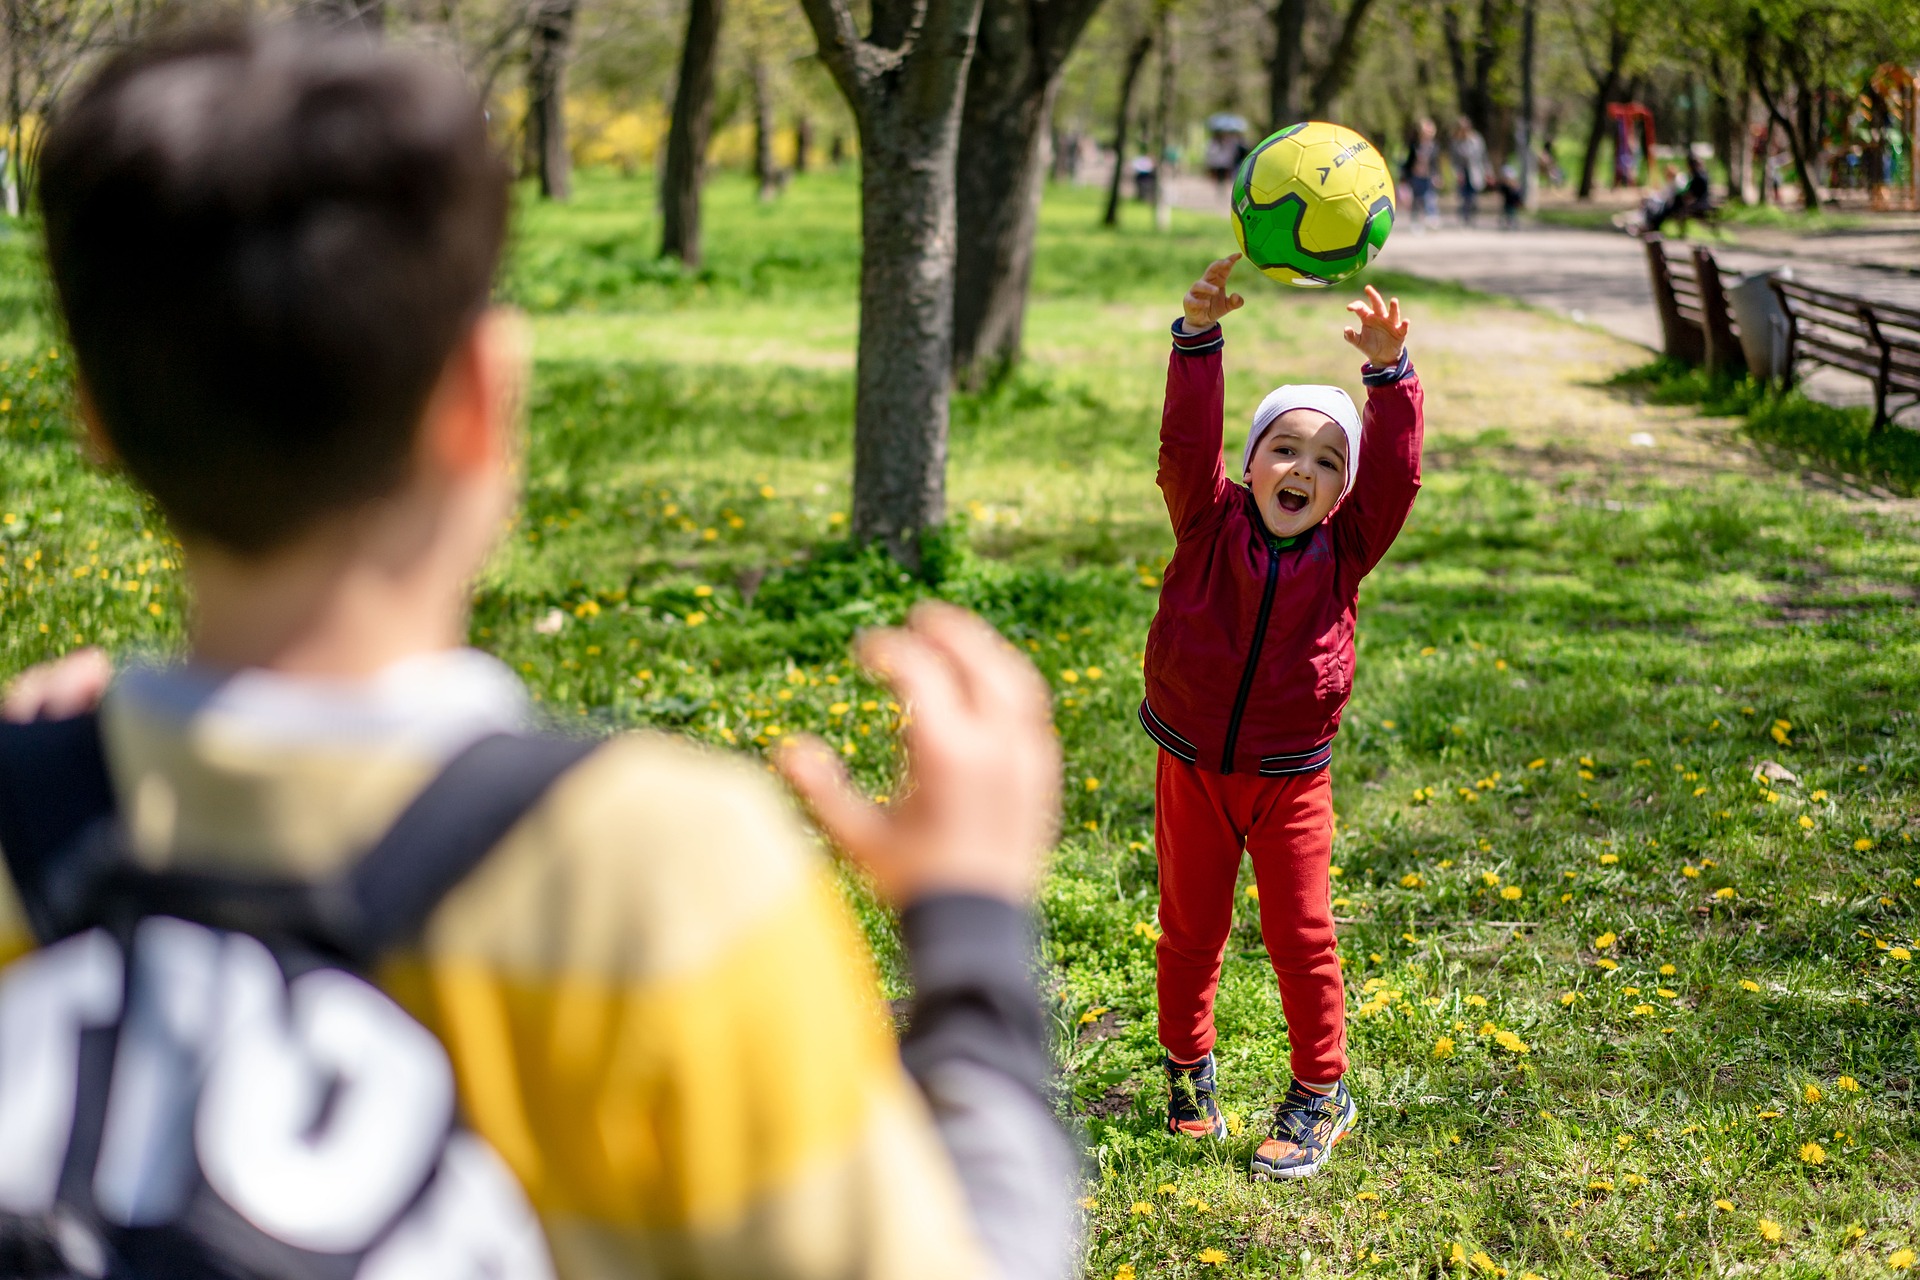 A young child throws a soccer ball to an older child in the park. 